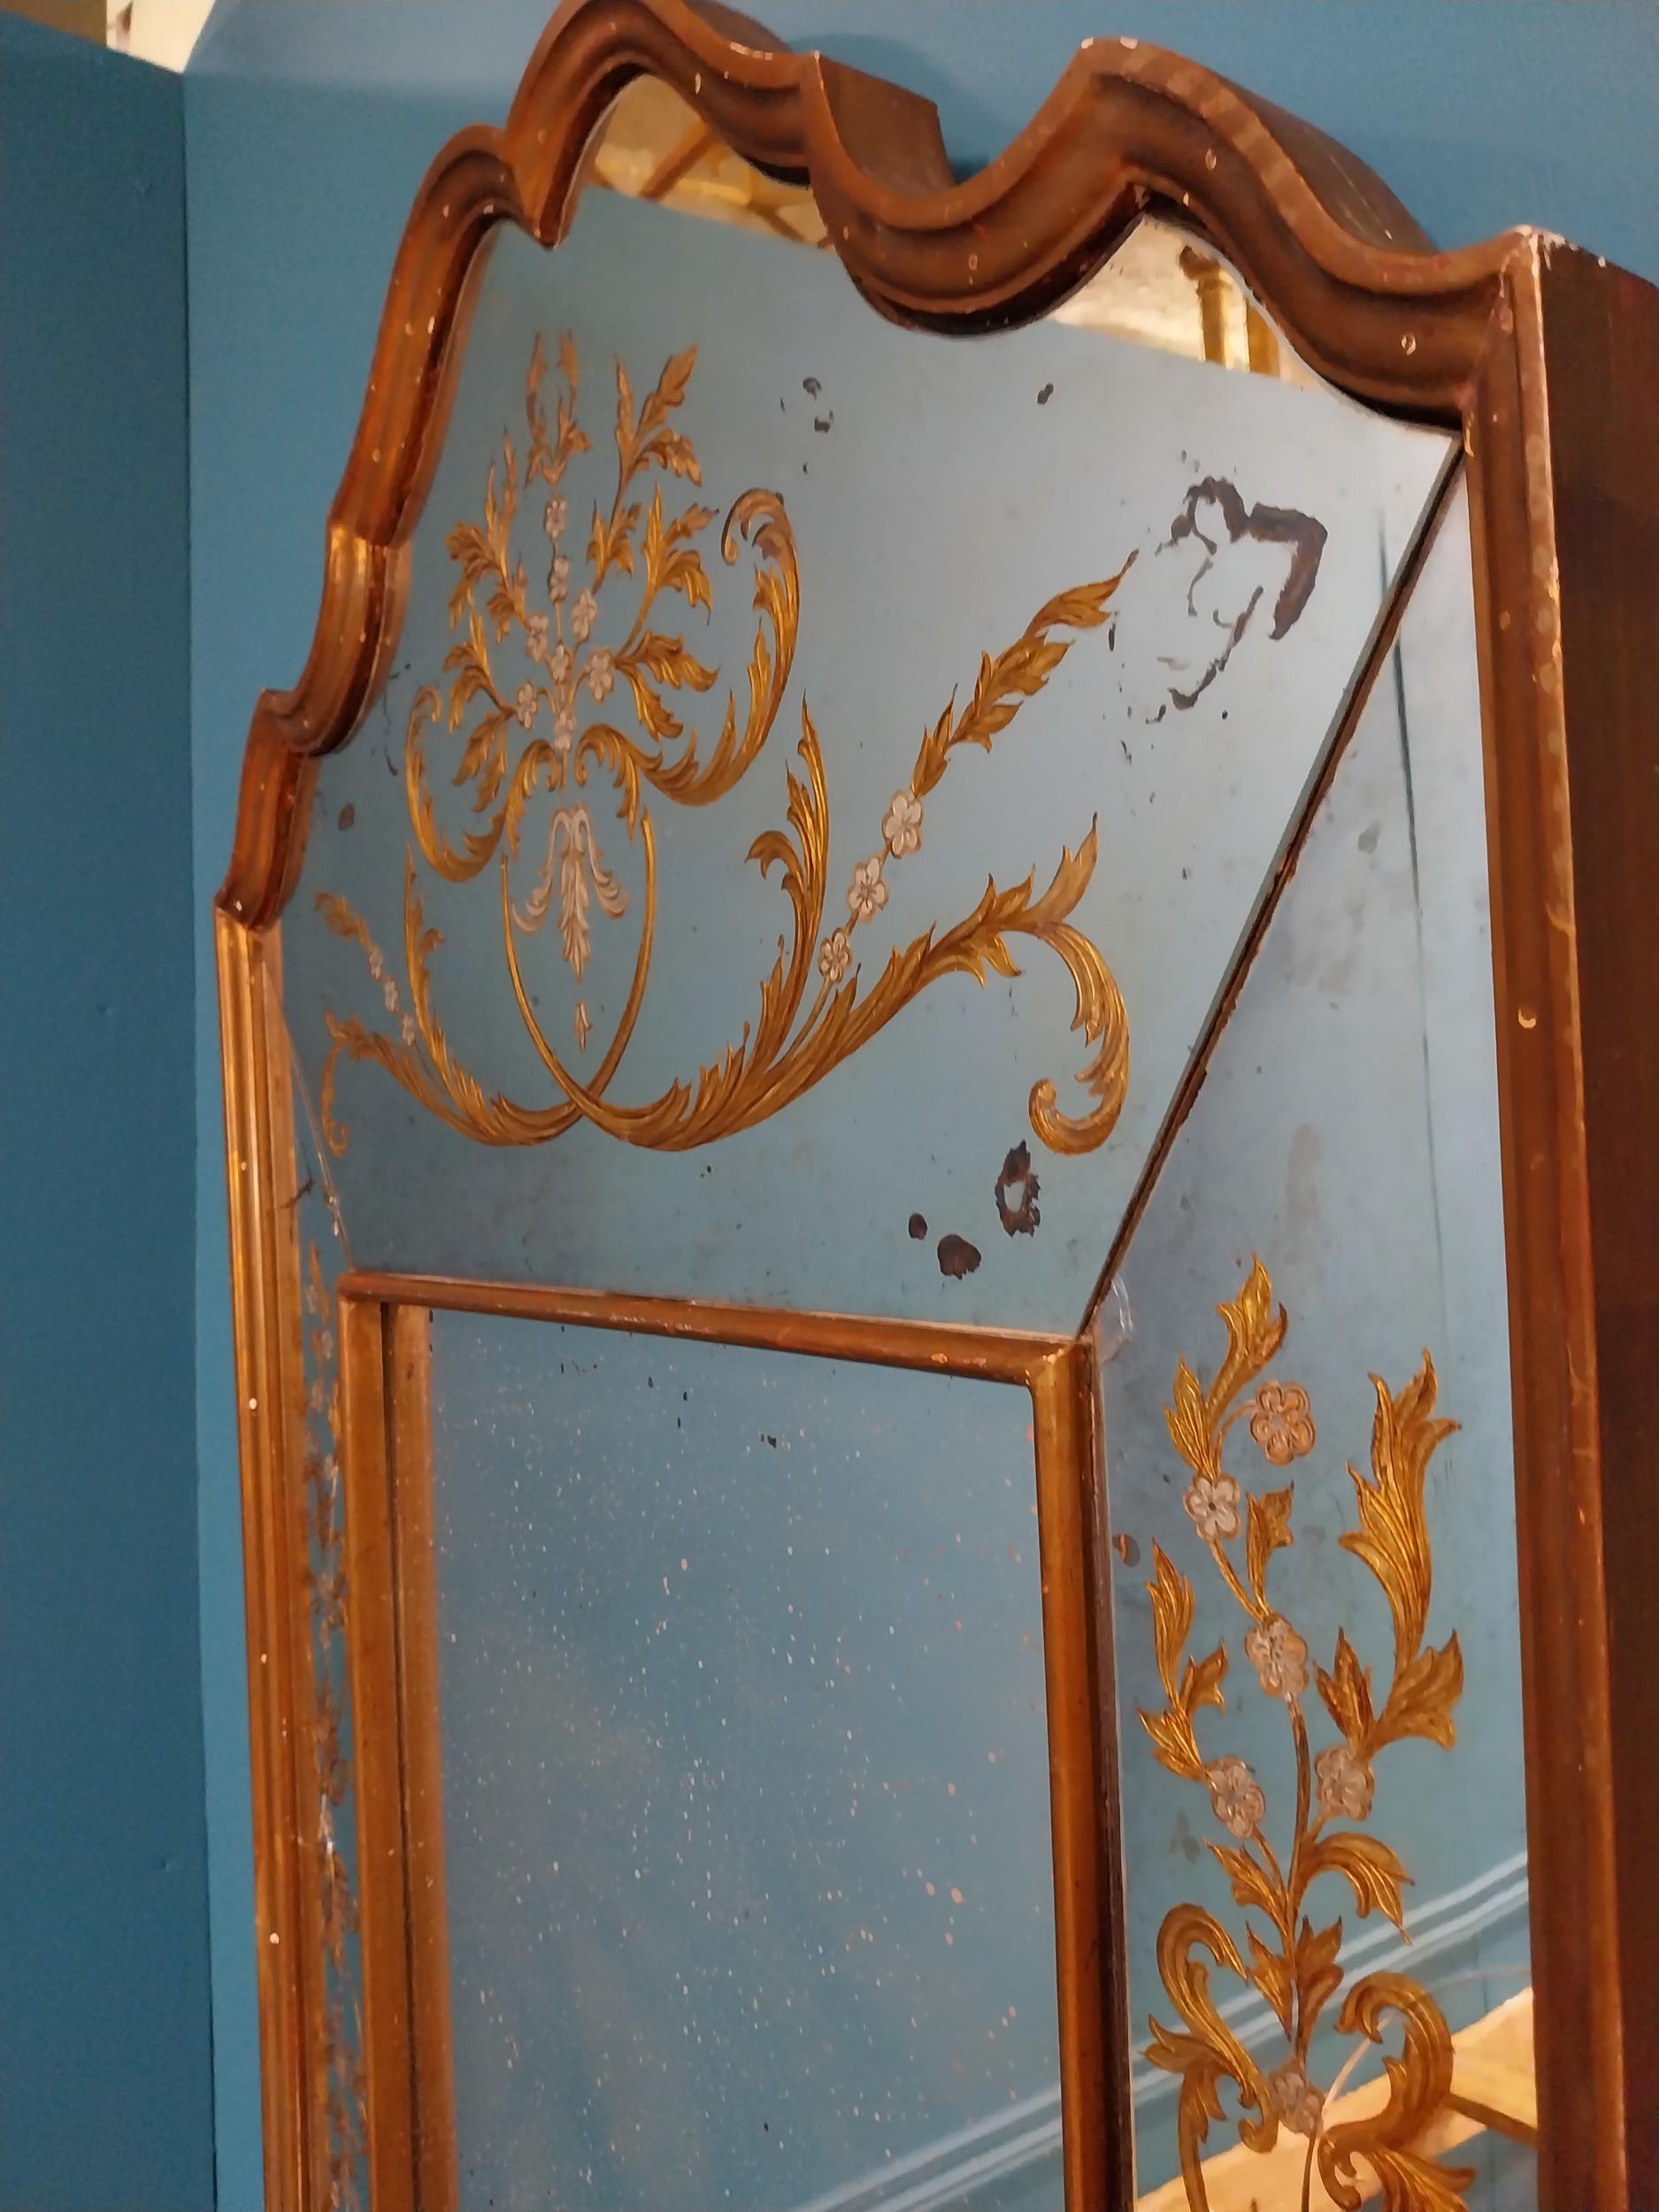 Early 20th C. Venetian mirror with gilded decoration {102 cm H x 70 cm W}. - Image 4 of 4